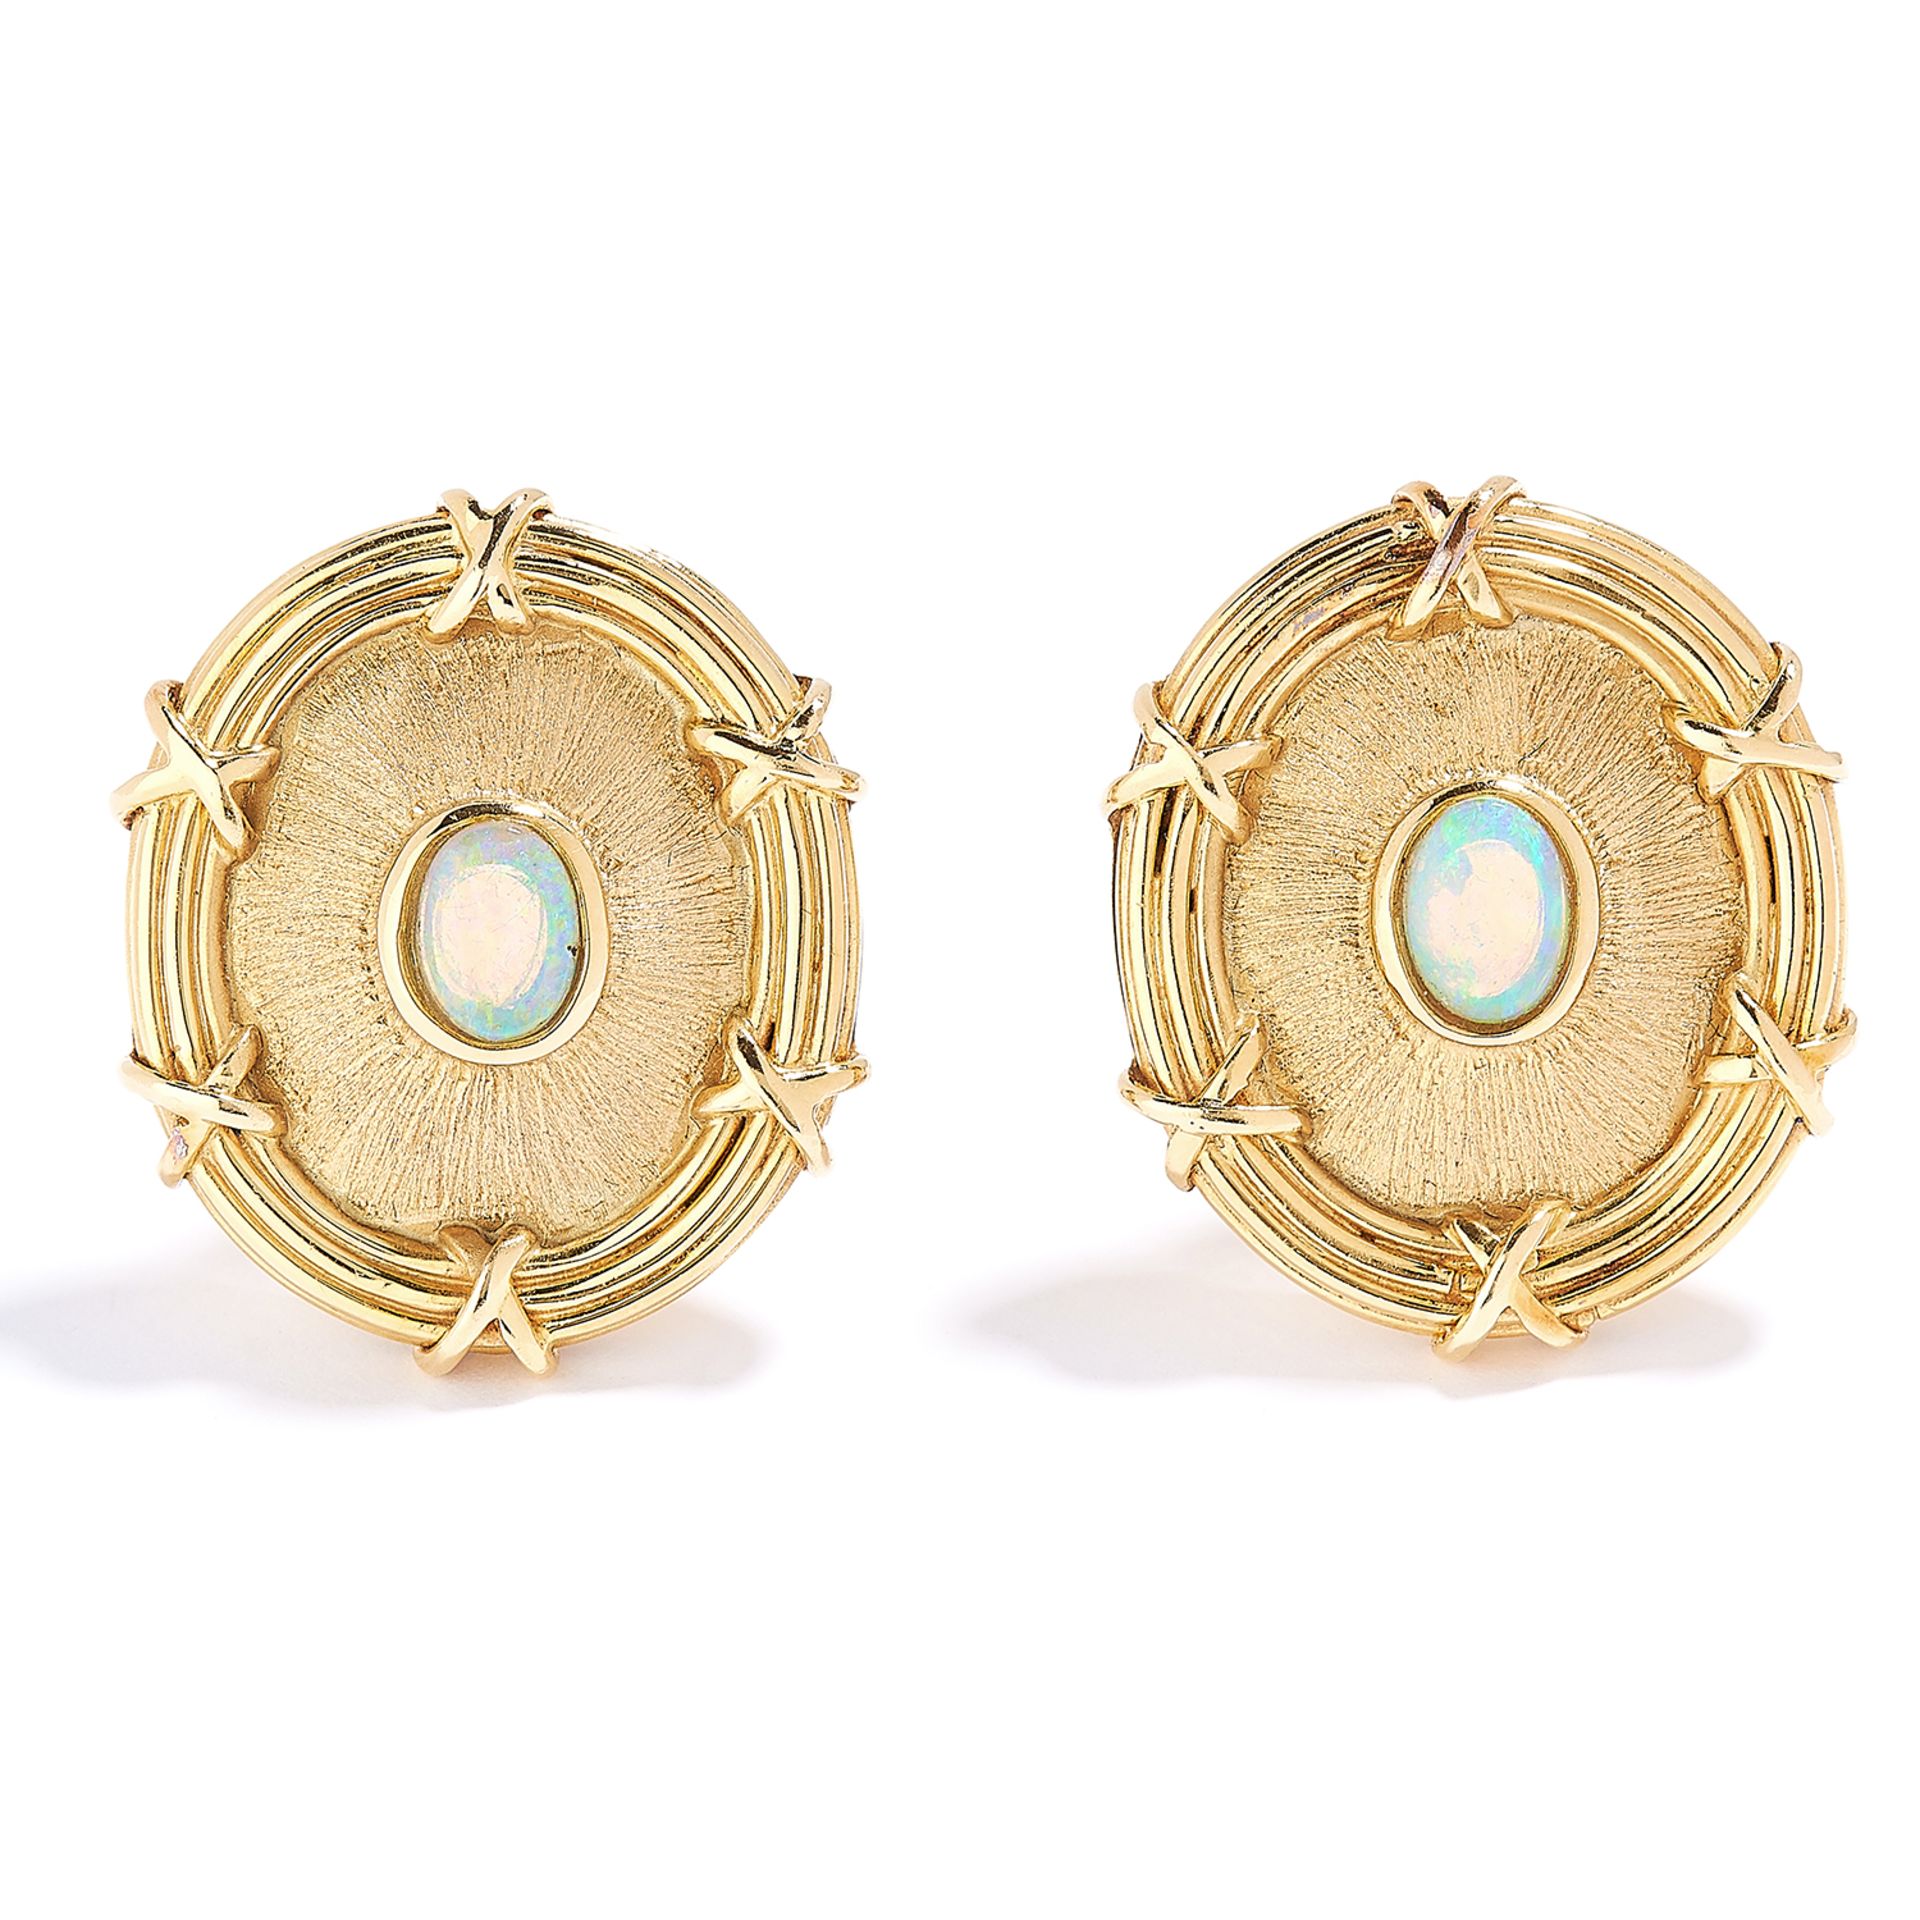 OPAL EARRINGS in yellow gold, each set with a cabochon opal in reeded gold border, 2.5cm, 22.3g.